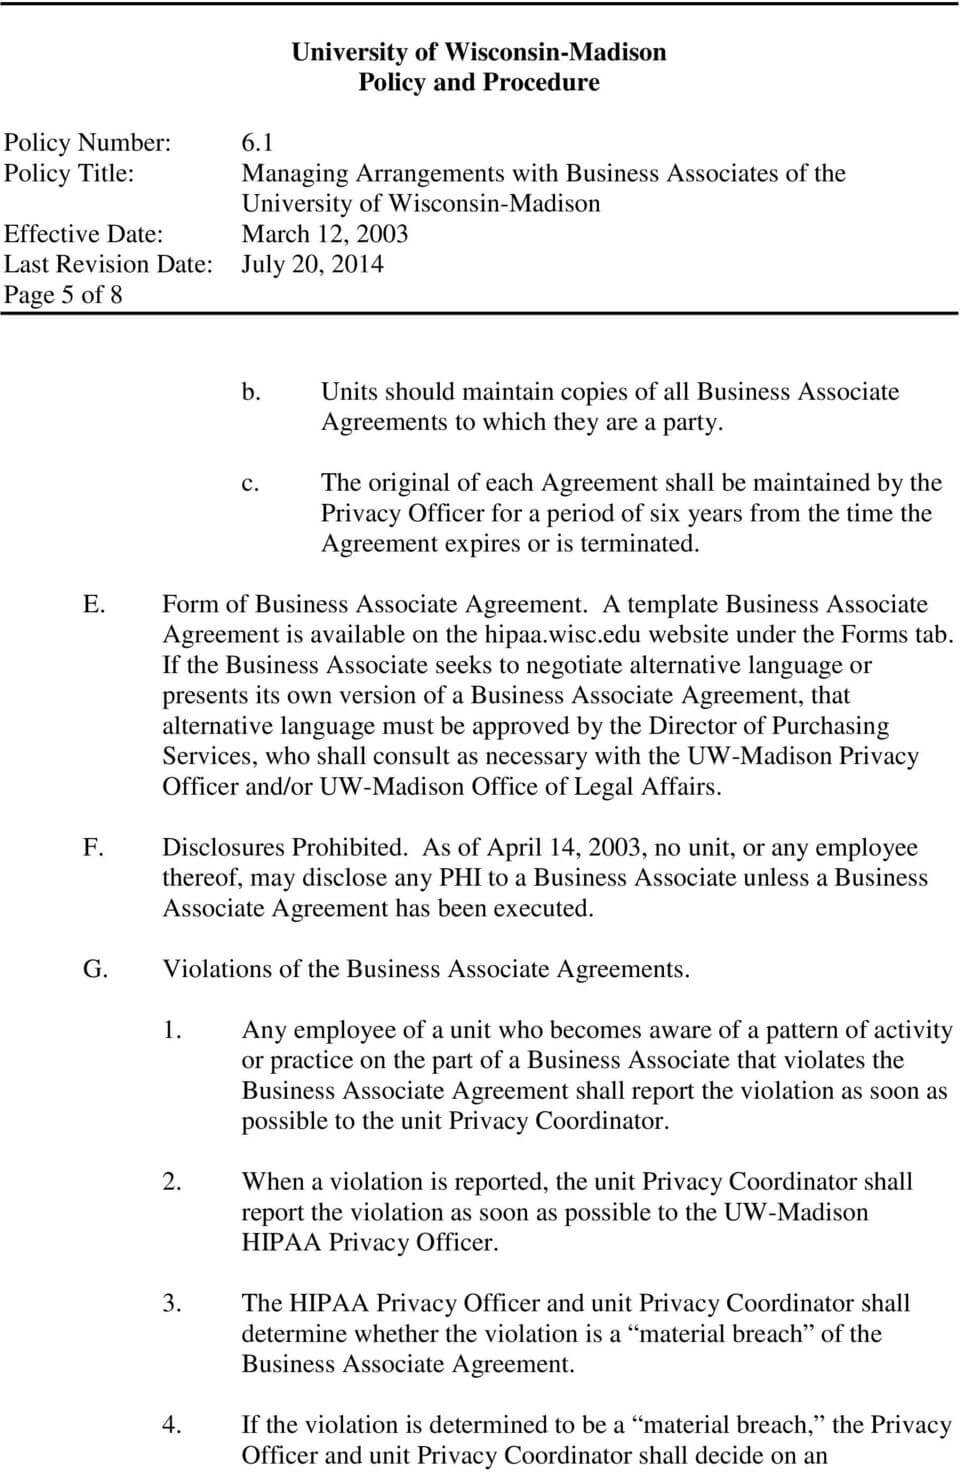 University Of Wisconsin Madison Policy And Procedure With Regard To Business Associate Agreement Template